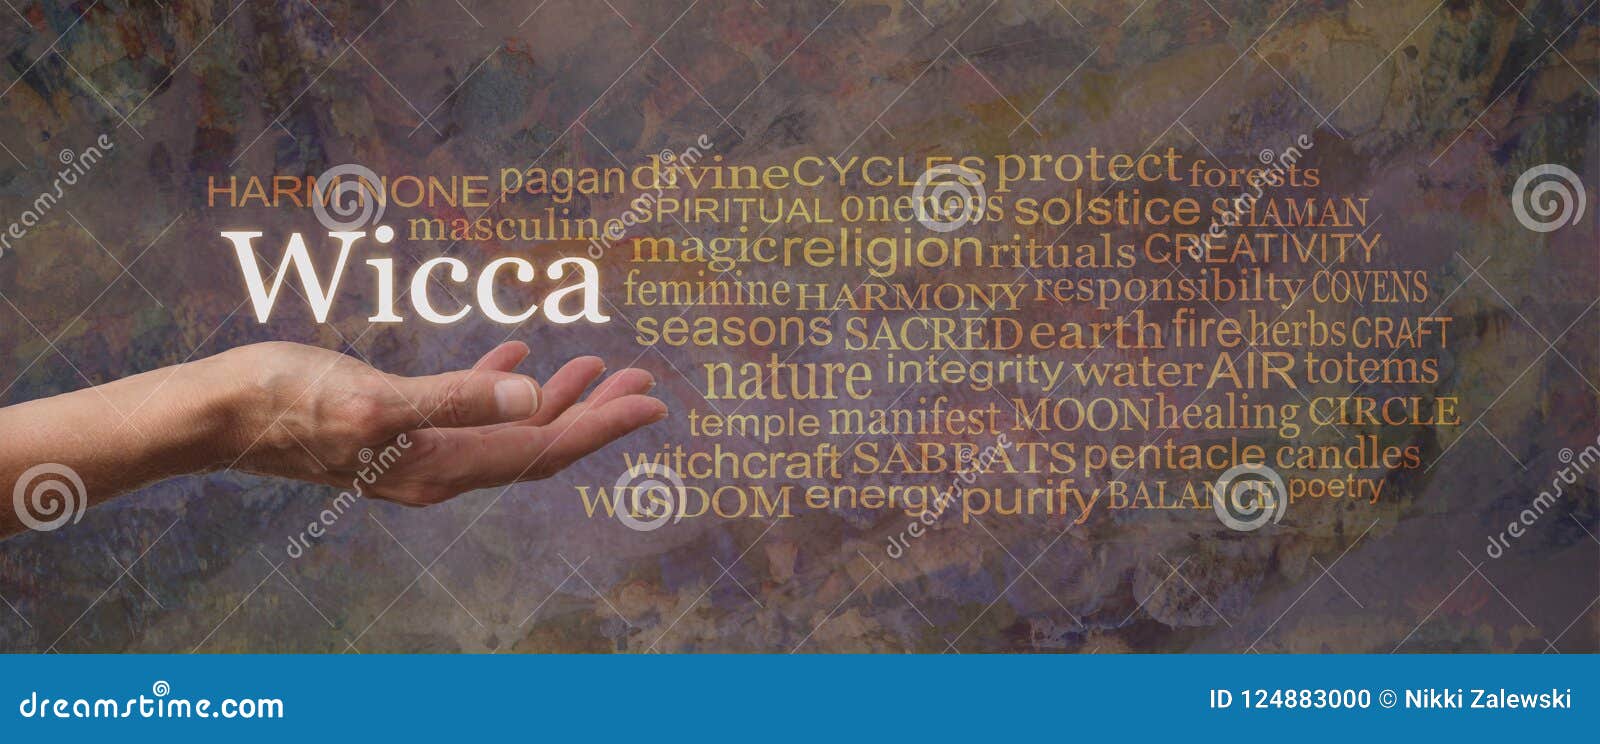 harm none wicca word tag cloud